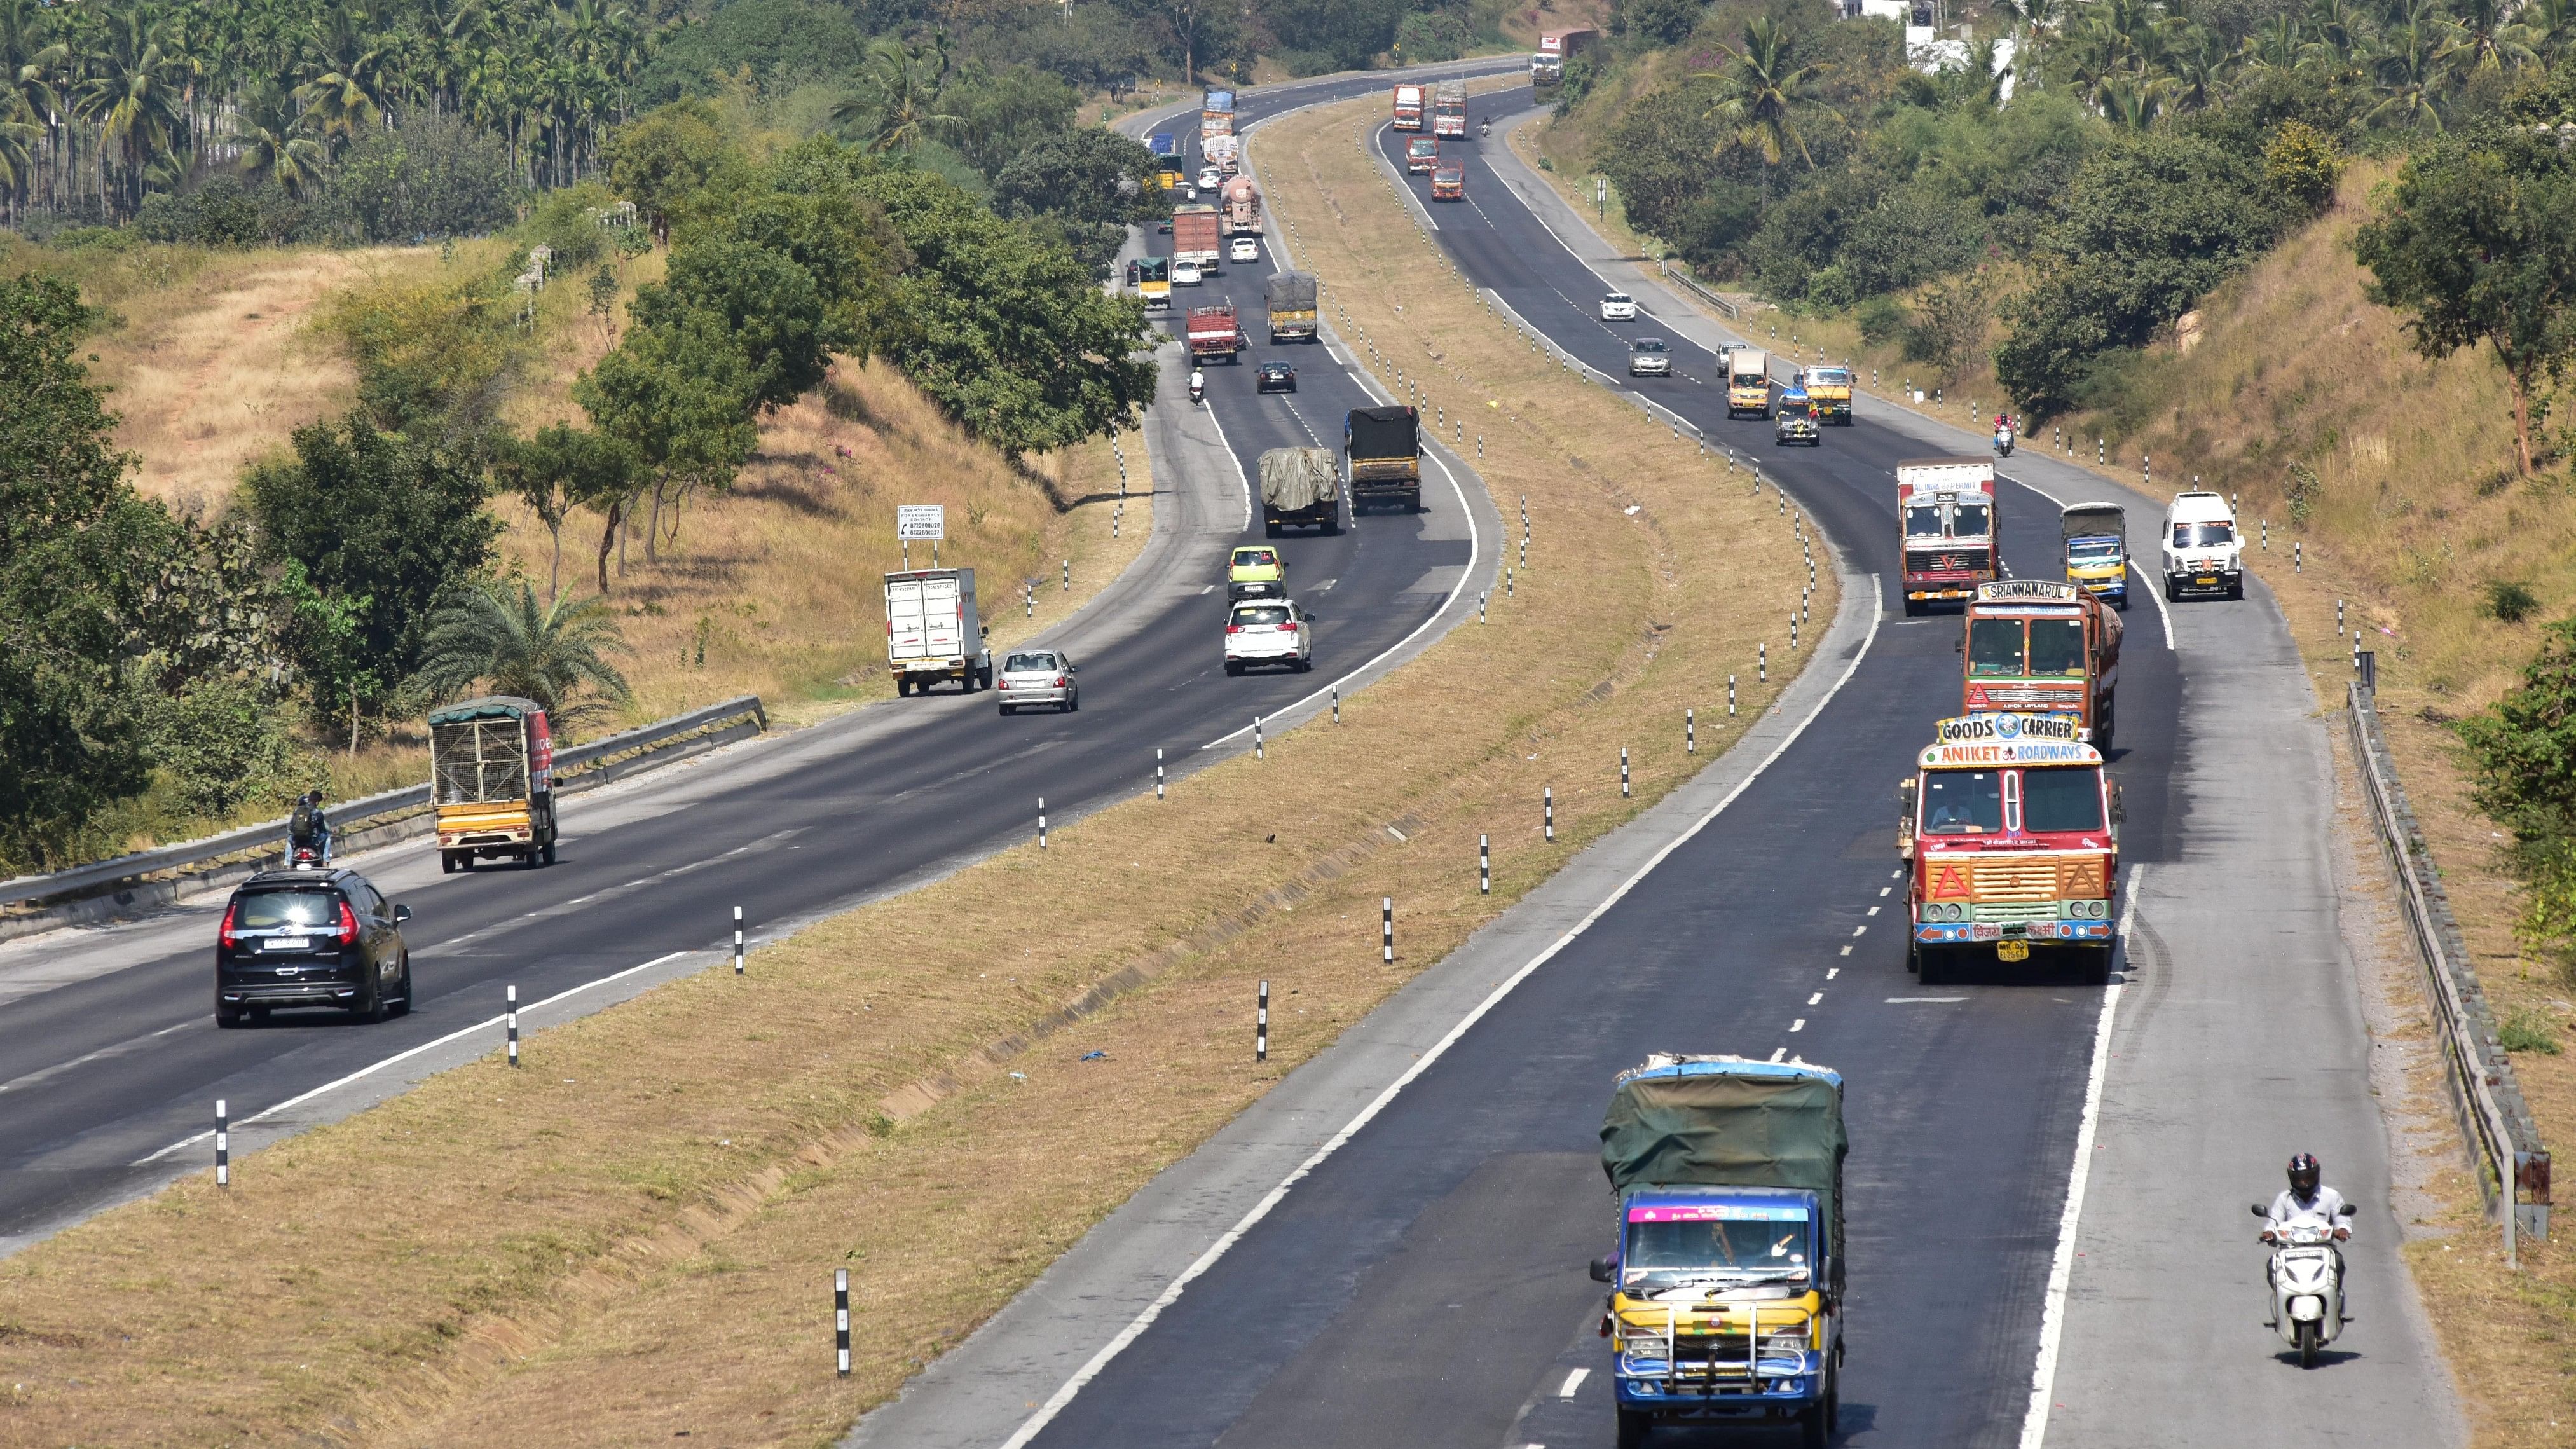 <div class="paragraphs"><p>Totalling about 40 km, the second phase of PRR aims to connect Mysuru and Hosur roads via Bannerghatta and Kanakapura roads.</p></div>